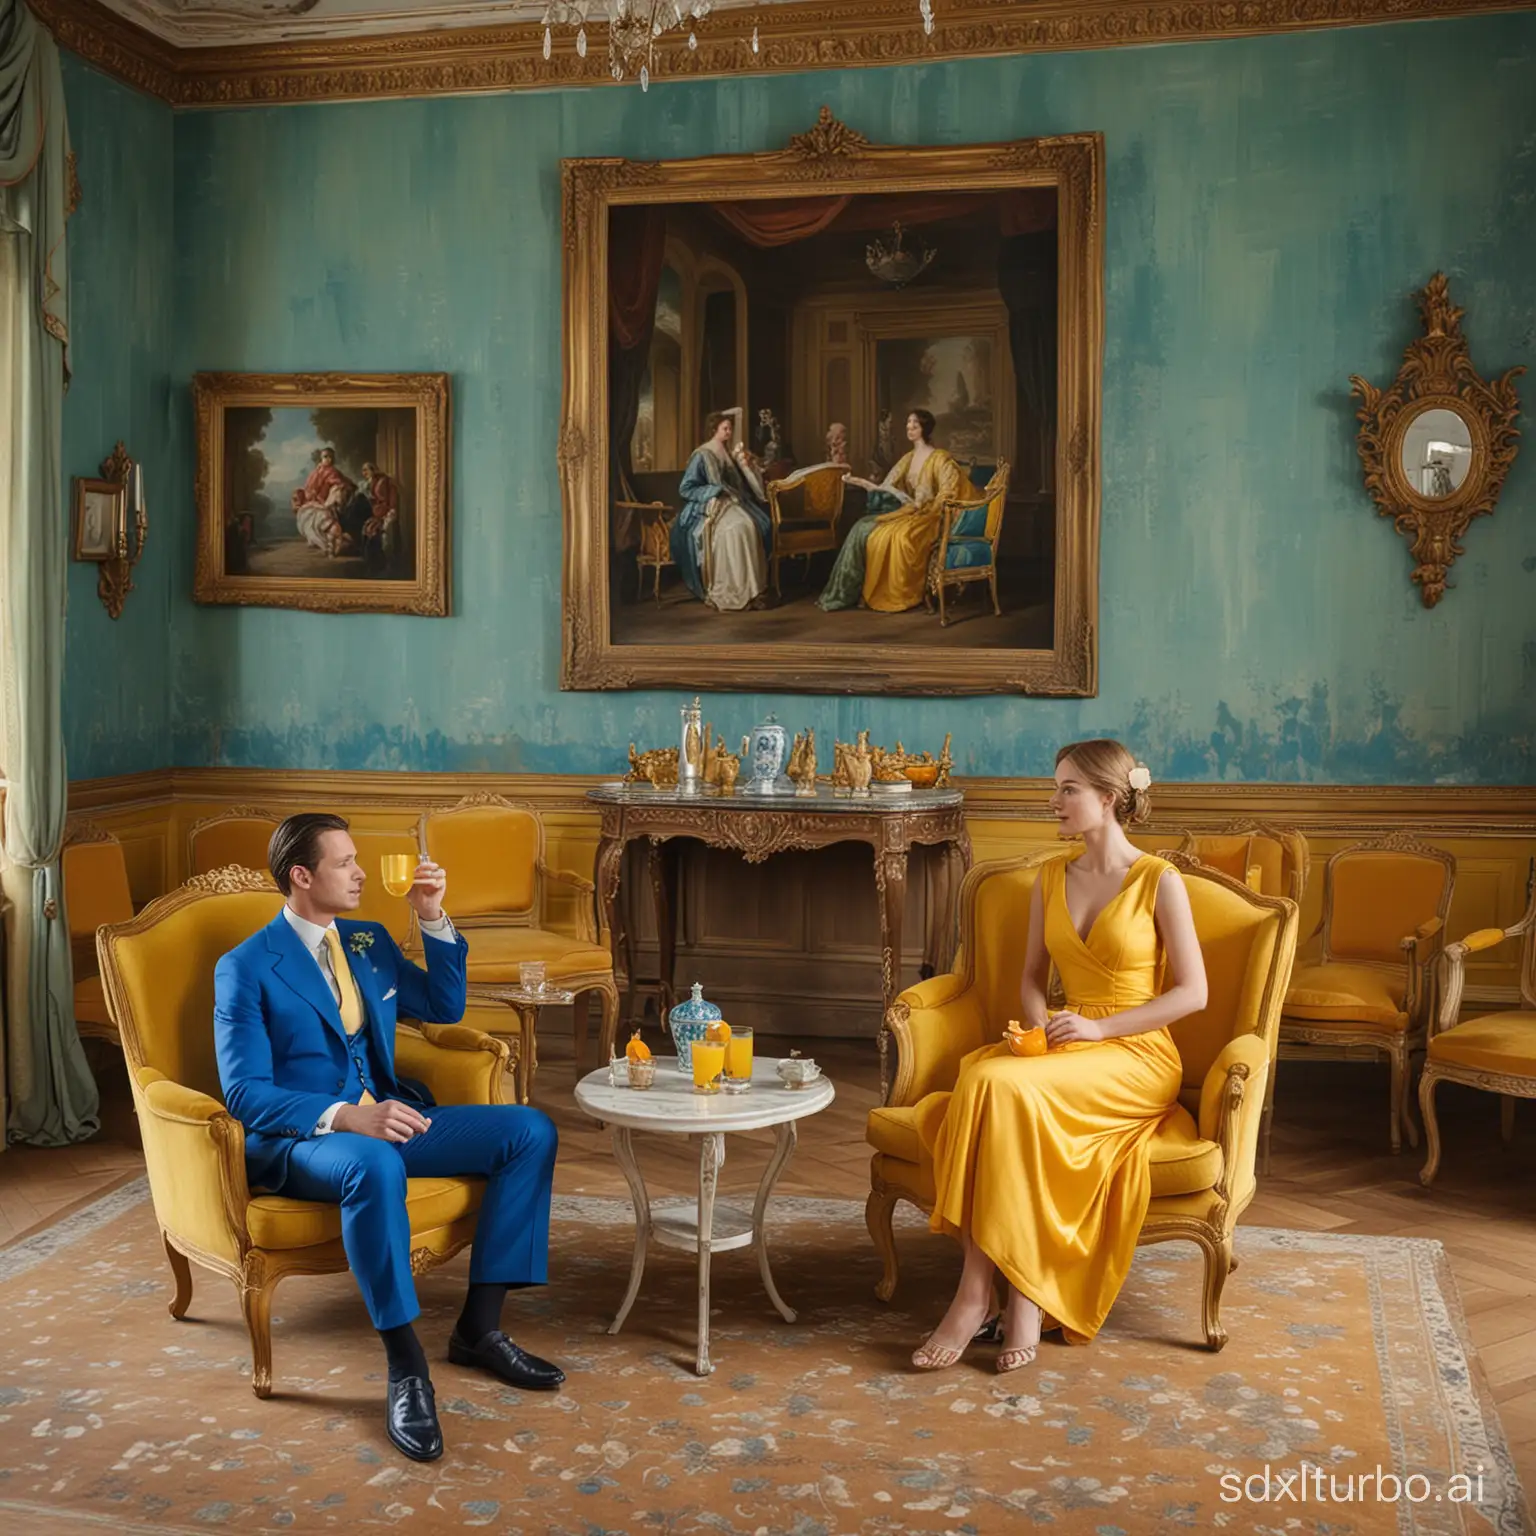 A man in a blue suit on the left and a woman in a yellow dress on the right in the corner of an elegant blue room, each drinking a green of orange juice. The 2 people sitting on royal chairs They are sitting on castle-type chairs with paintings in the background. There is a door on the left hidden by curtains with a bird's eye view